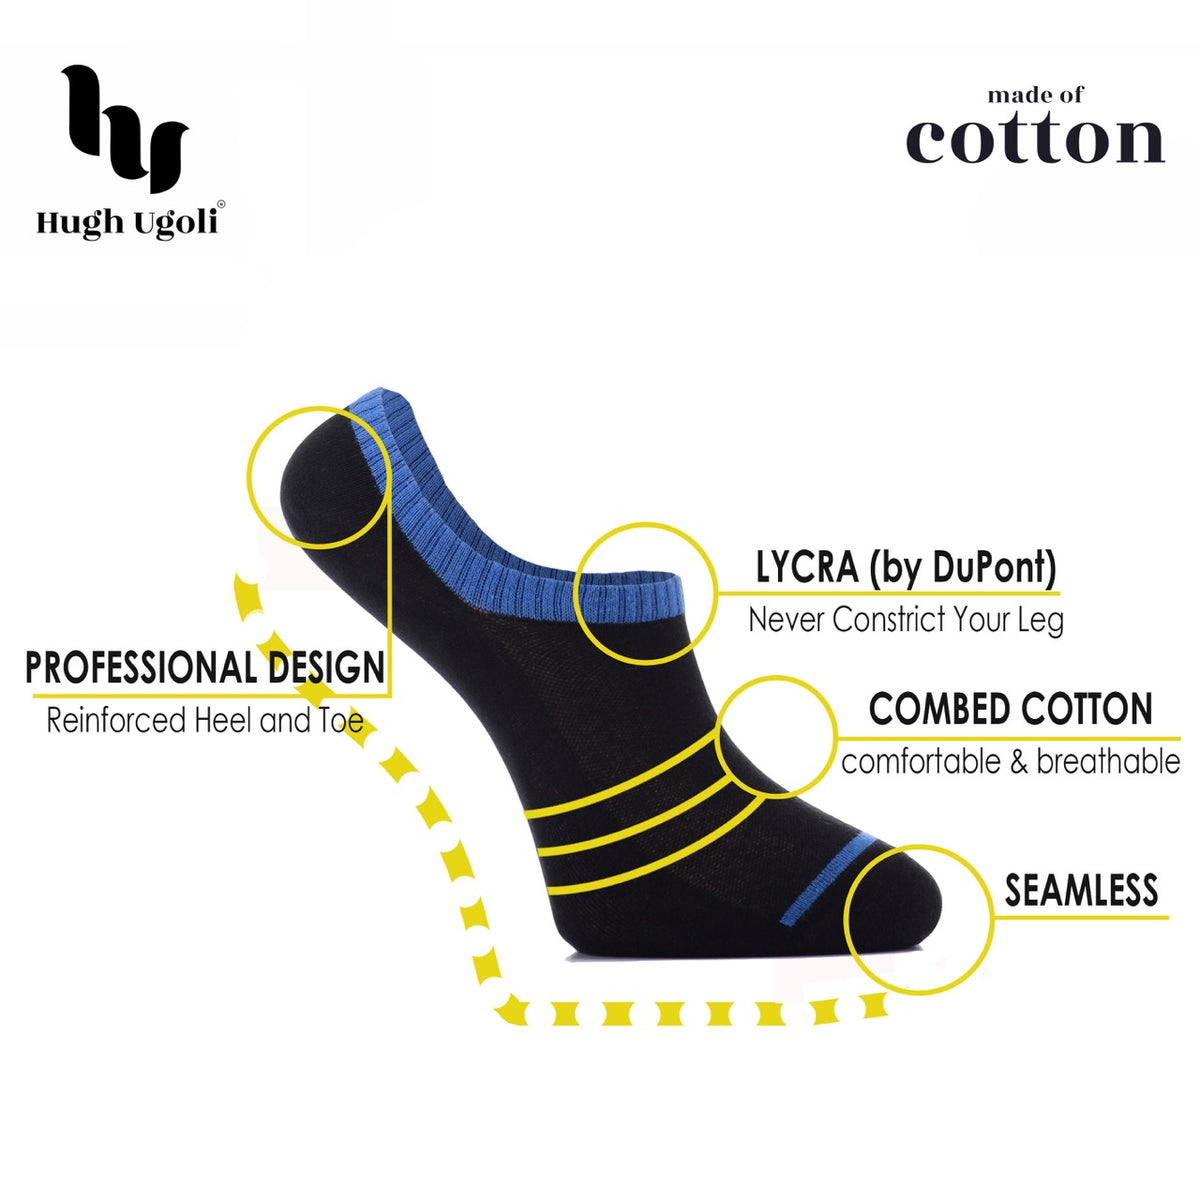 A pair of Cotton No-Show Socks for Men with the word 'cotton' imprinted on them. The socks feature a comfortable fit and are made of high-quality cotton material.